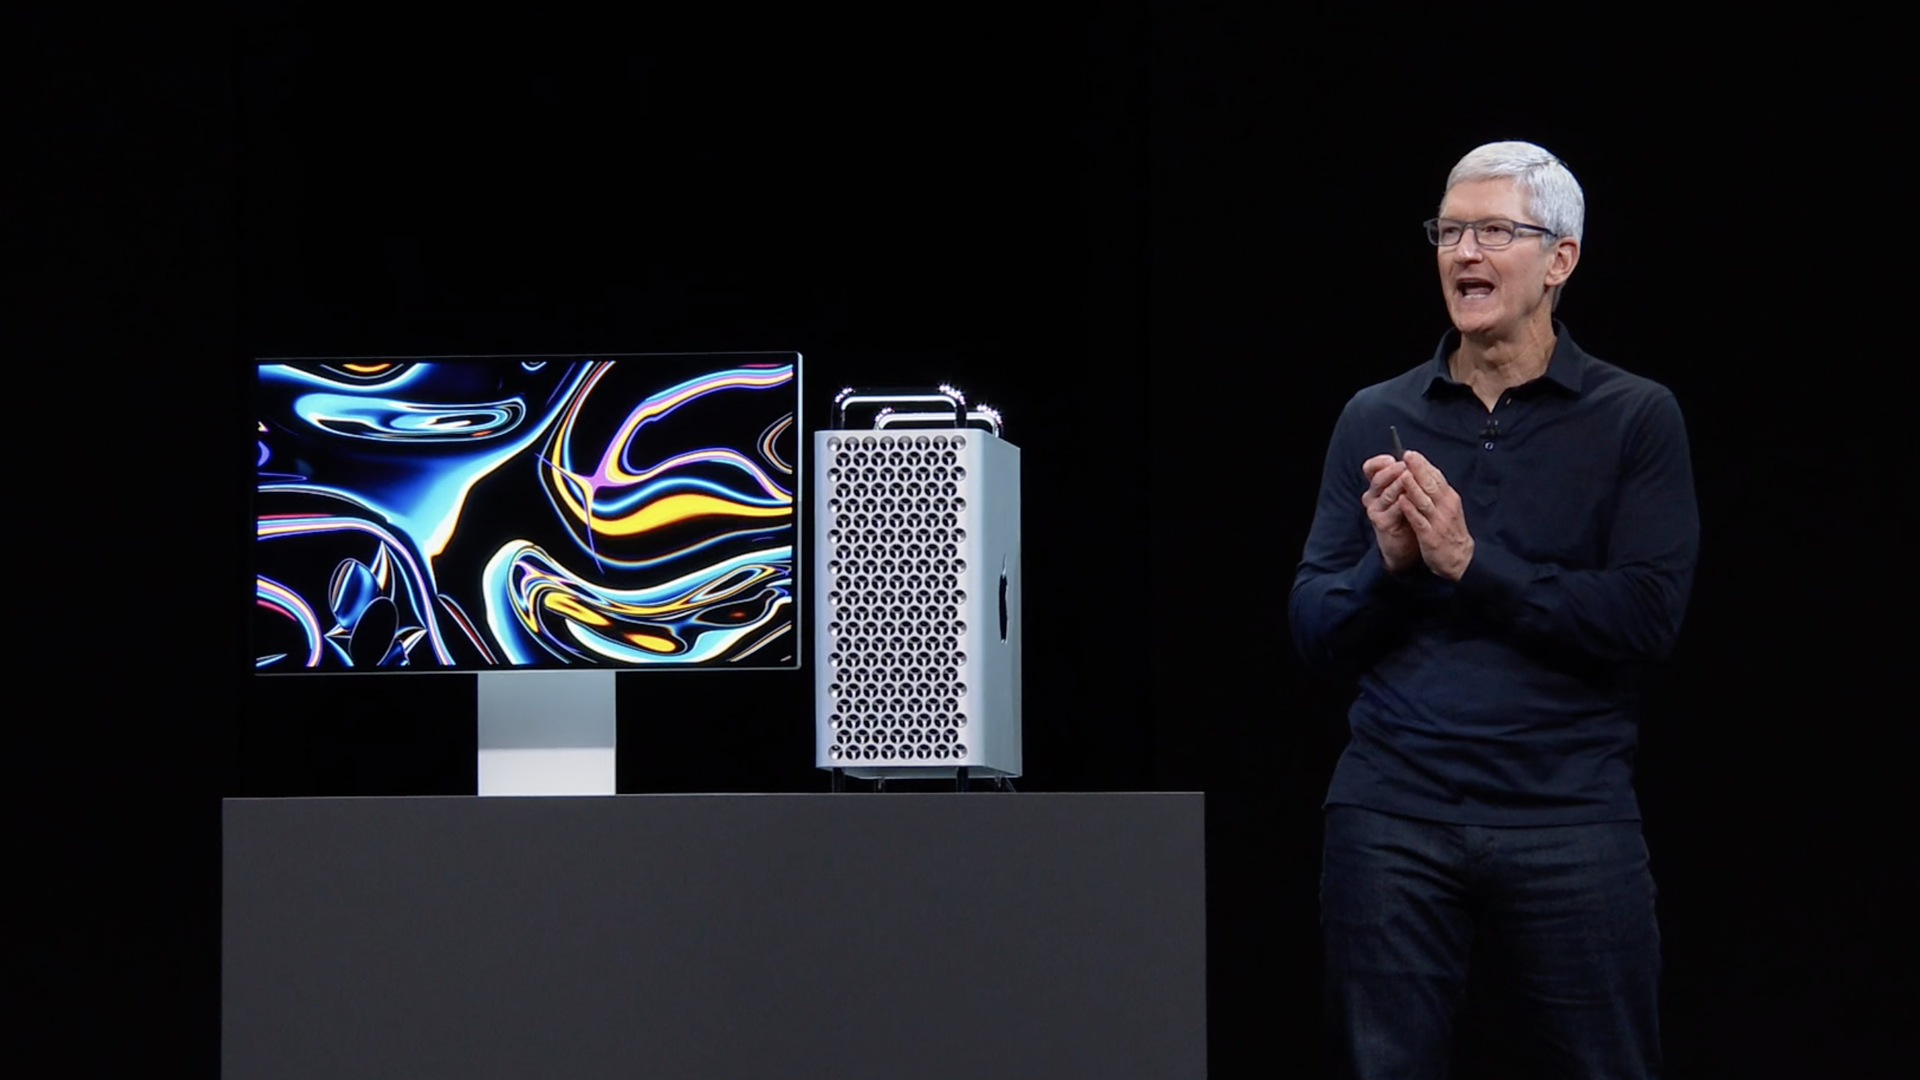 Apple CEO Tim Cook standing next to new model Mac Pro 